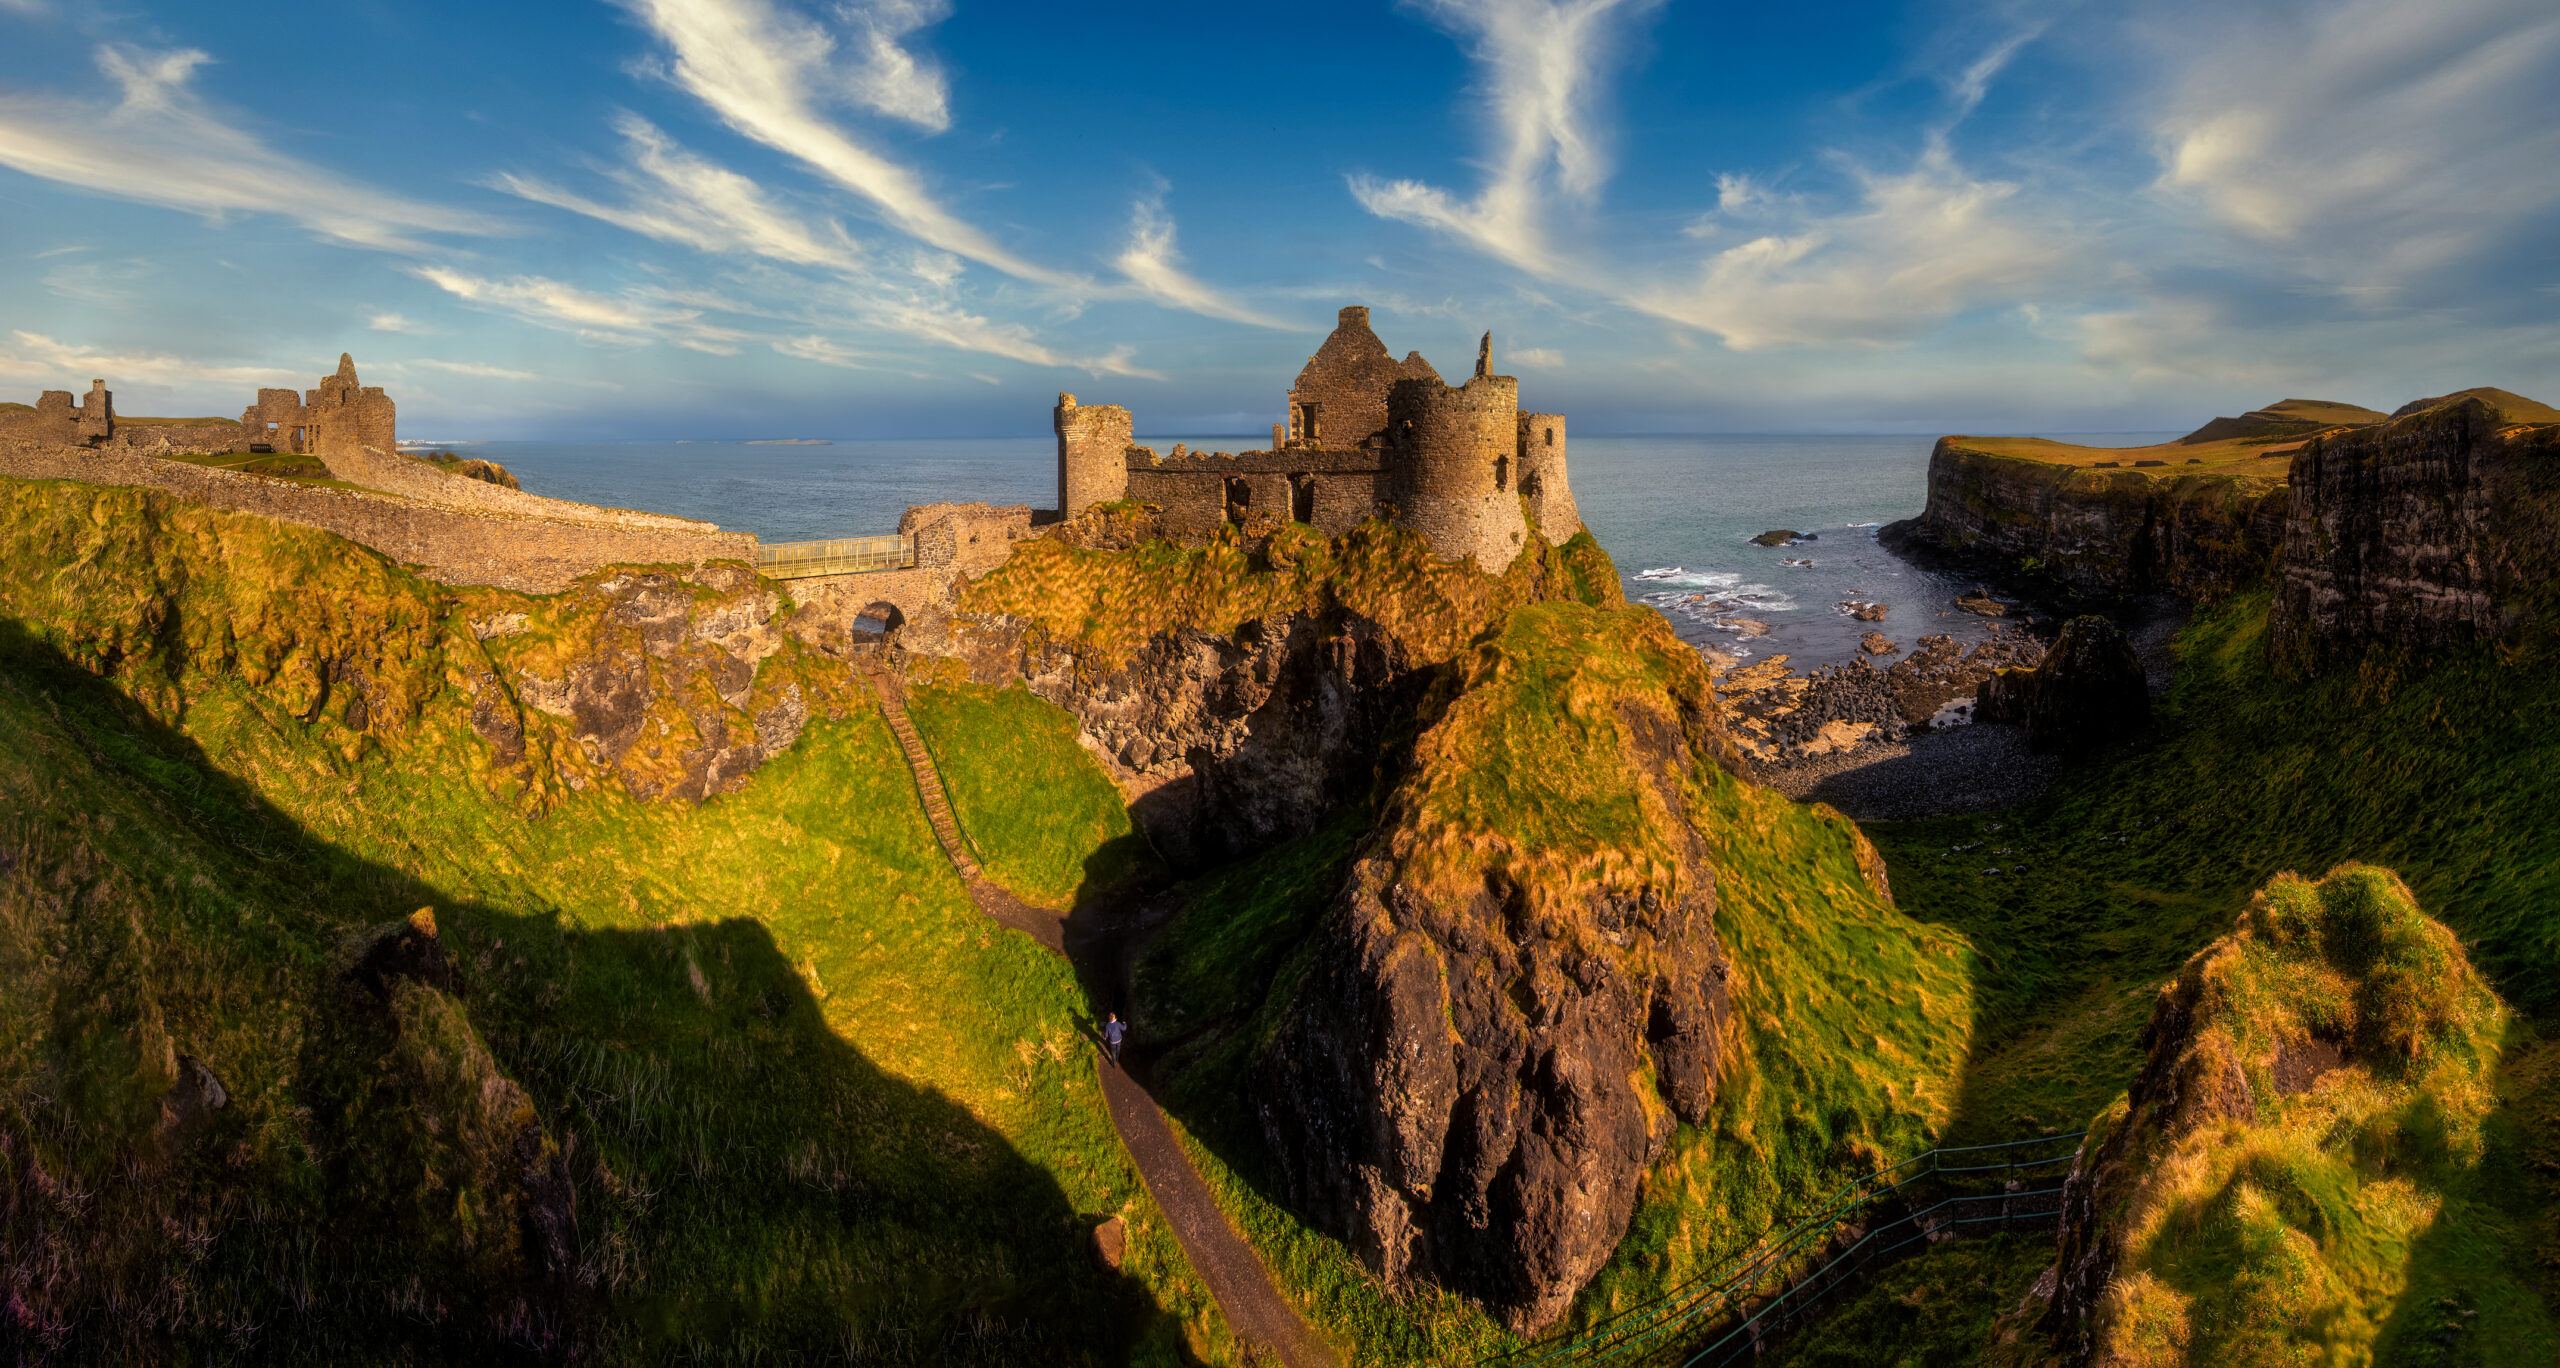 Dunluce Castle ruins on the cliffs of the North Coast of Ireland 